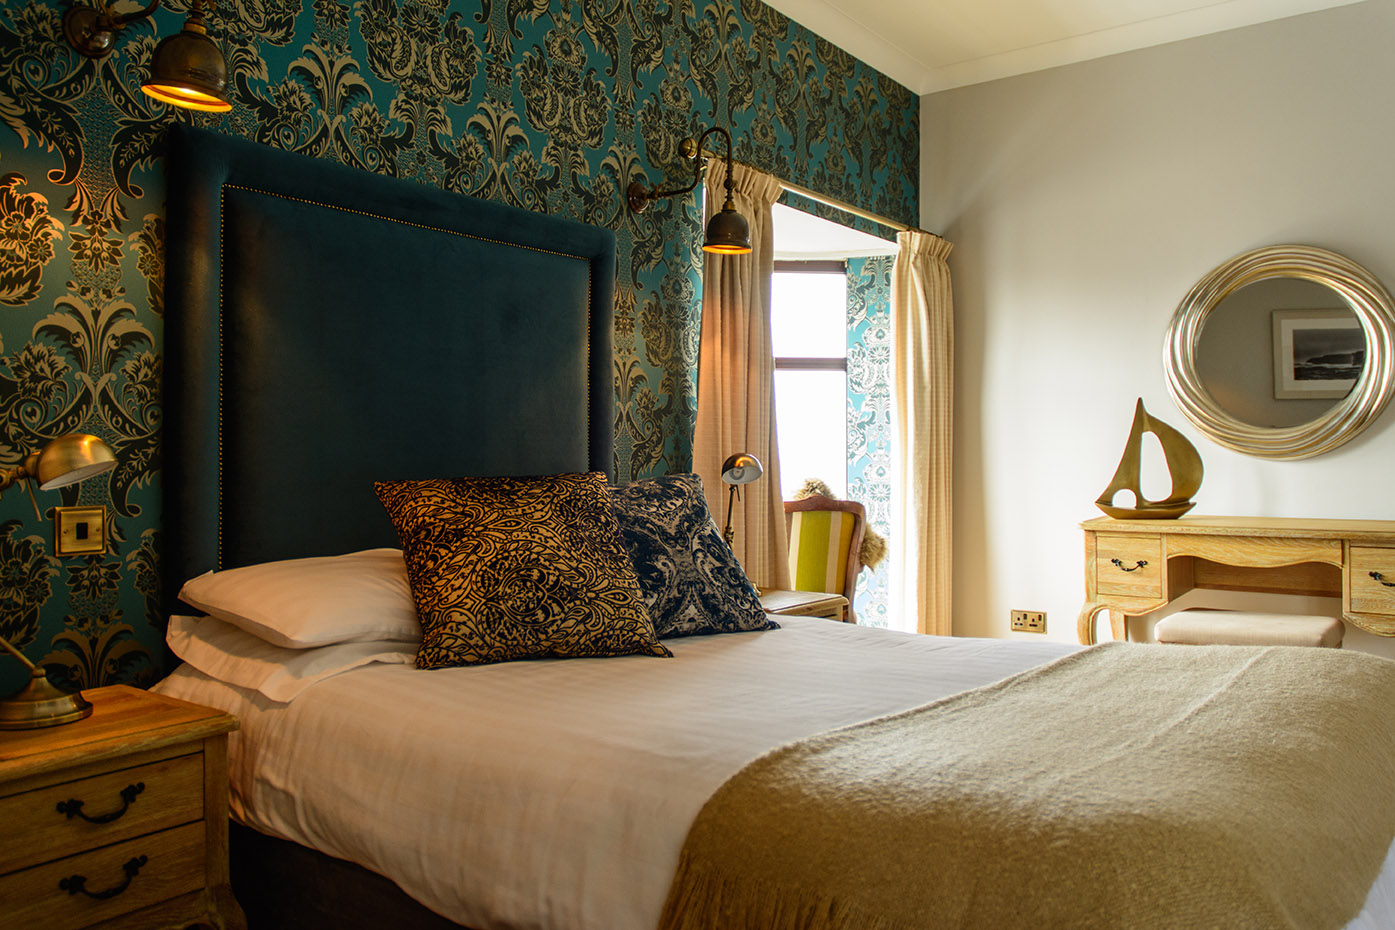 The Bayview Boutique Hotel, Kilkee. Design by Tess Stanford Interior Architects 